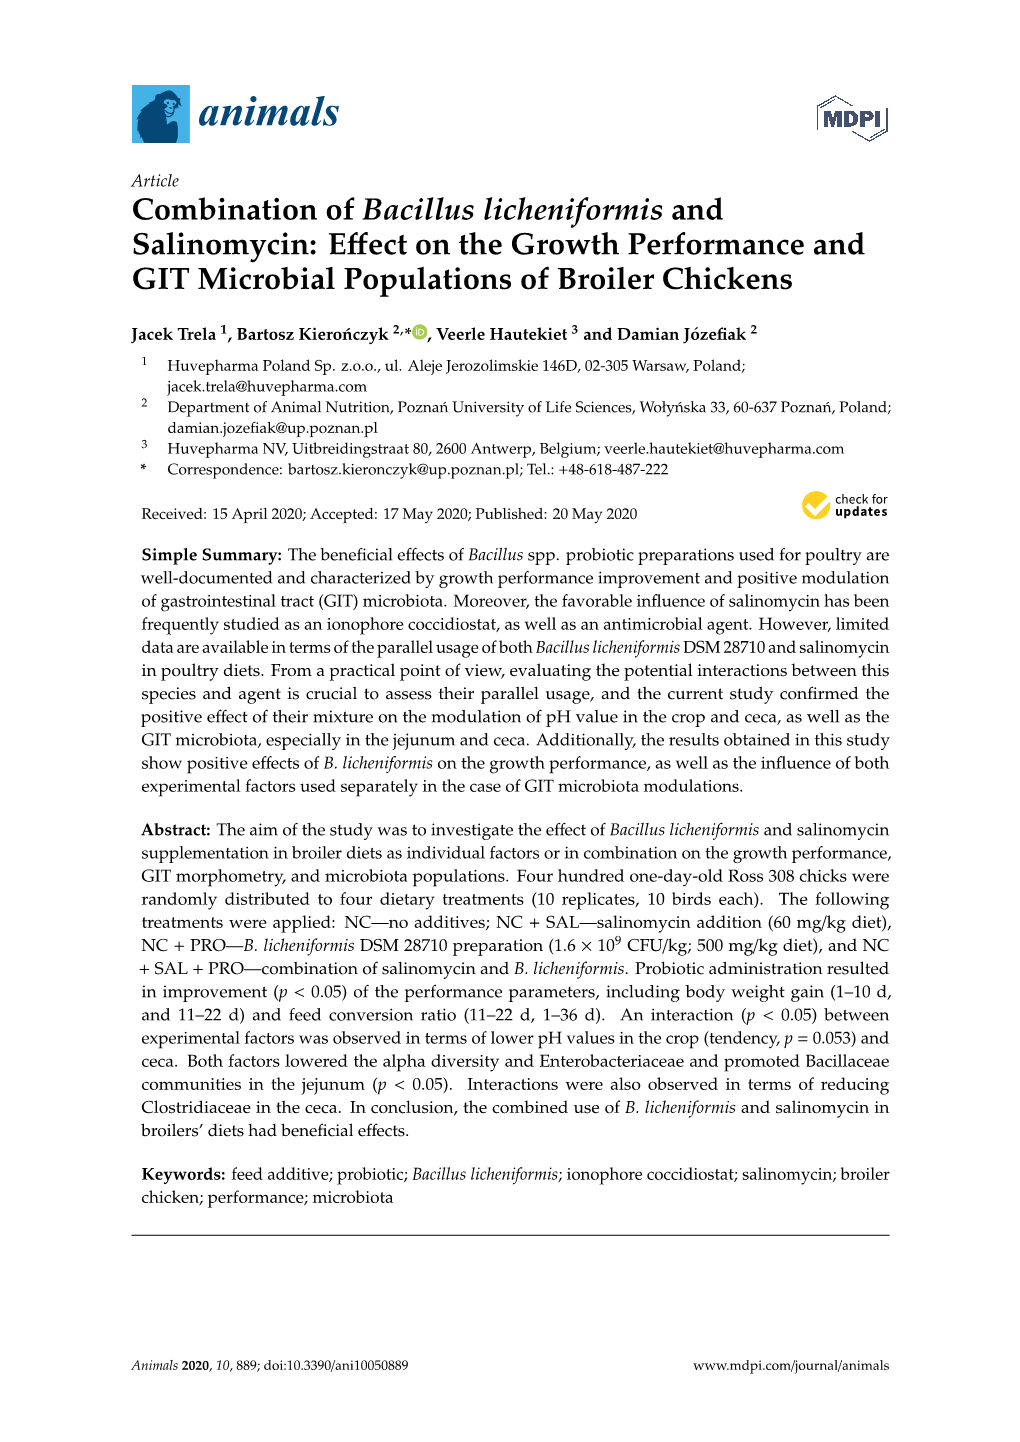 Combination of Bacillus Licheniformis and Salinomycin: Eﬀect on the Growth Performance and GIT Microbial Populations of Broiler Chickens